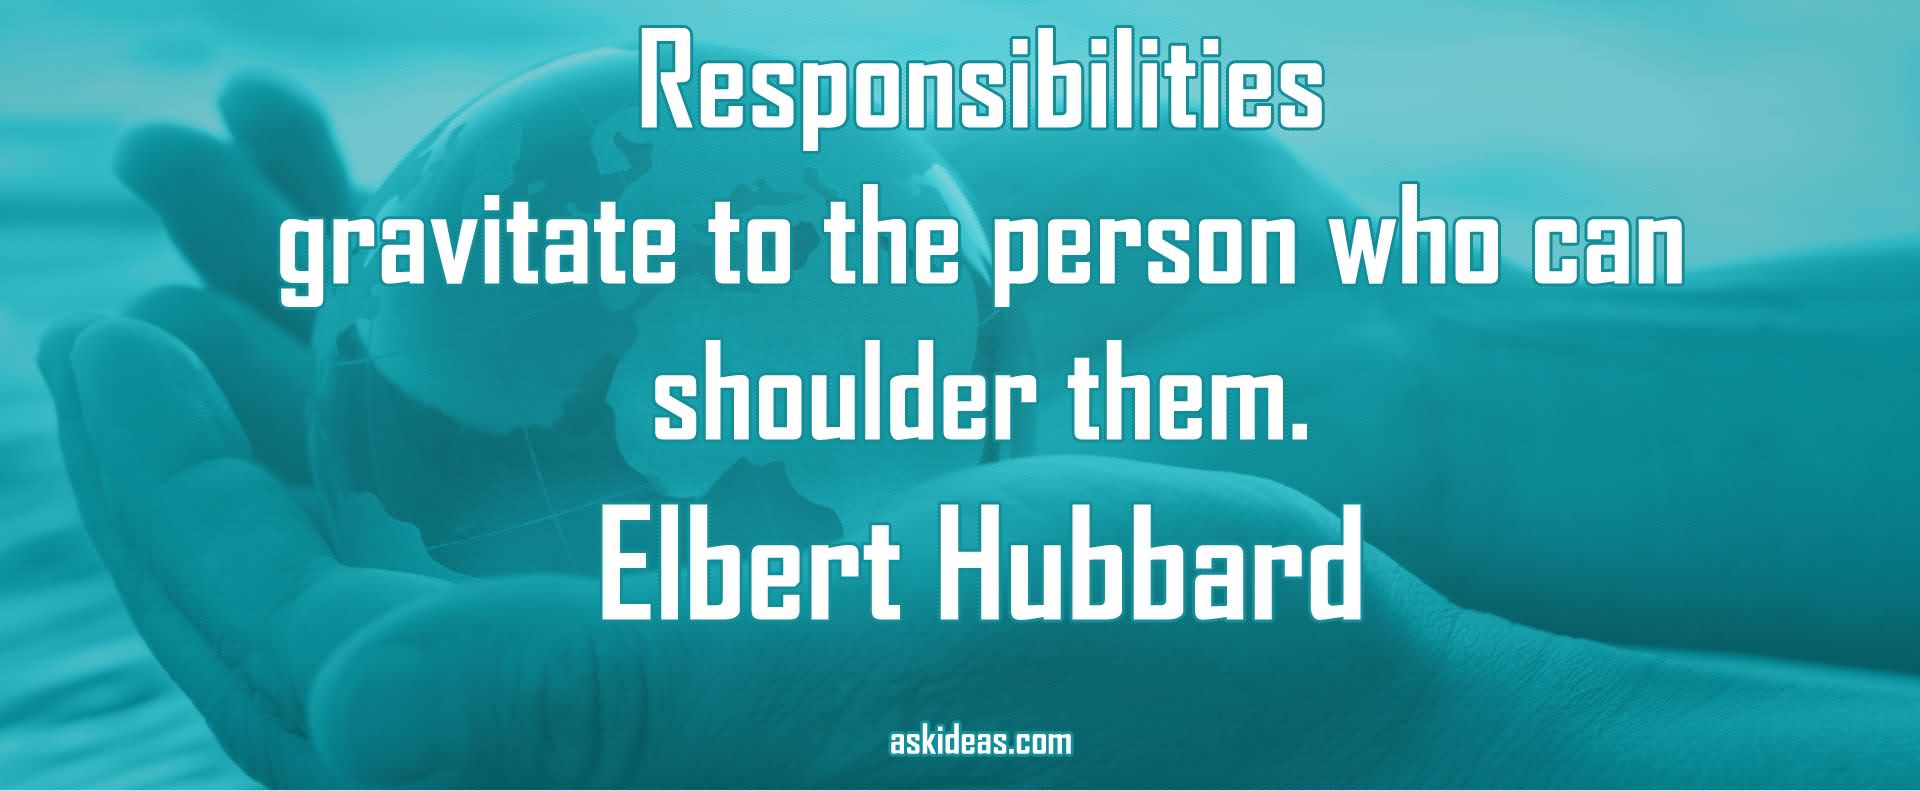 Responsibilities gravitate to the person who can shoulder them